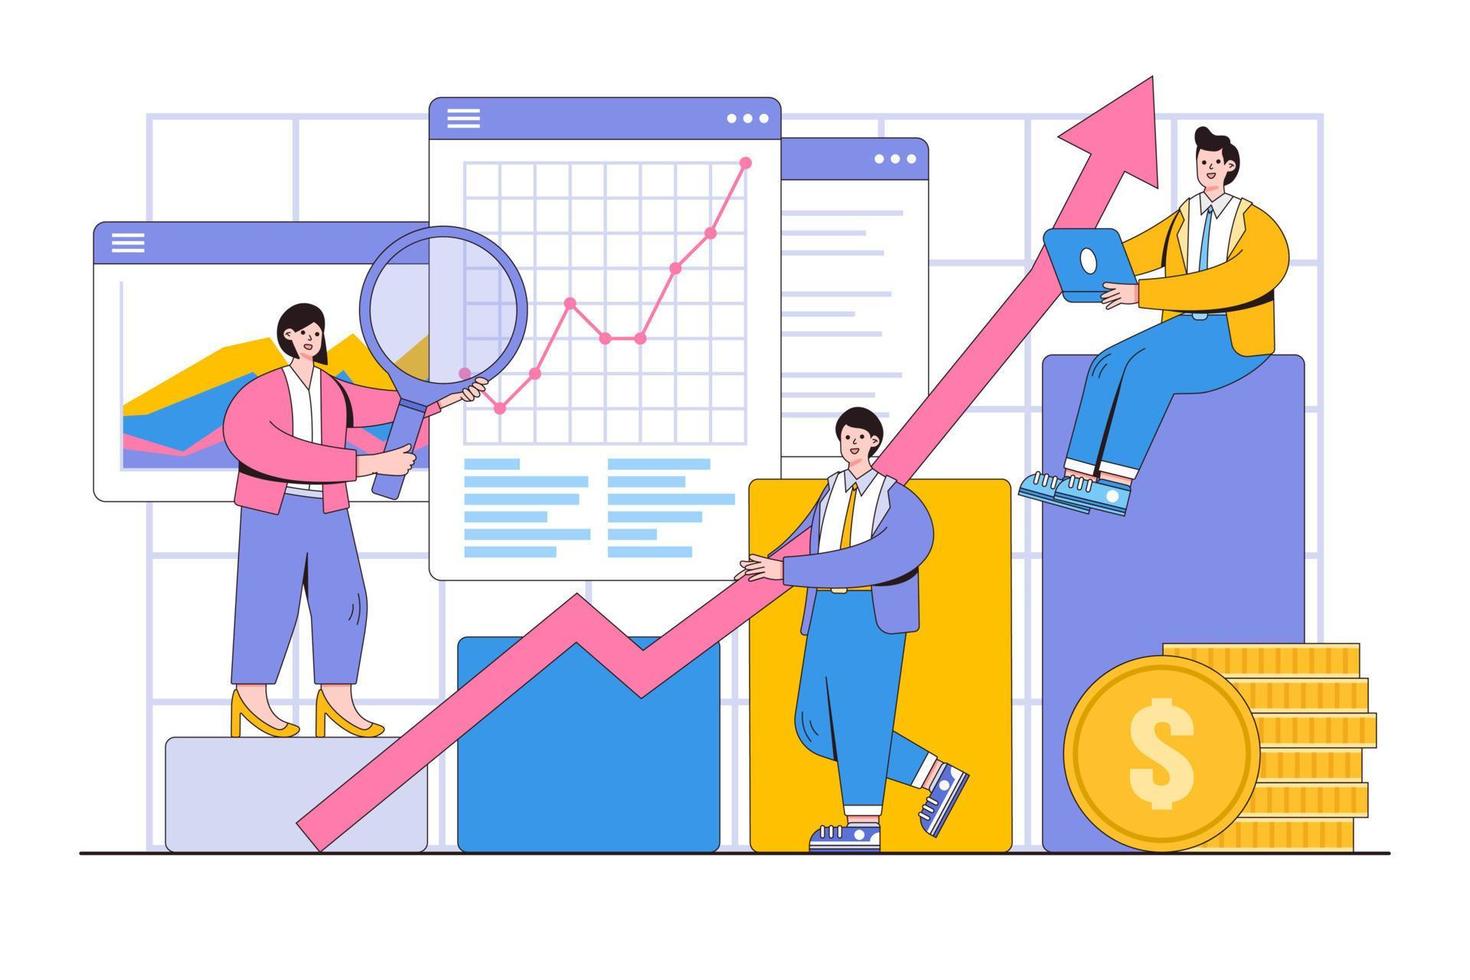 Flat statistical and data analysis for business finance investment concept. Business people team working with graph. Outline design style minimal vector illustration for landing page